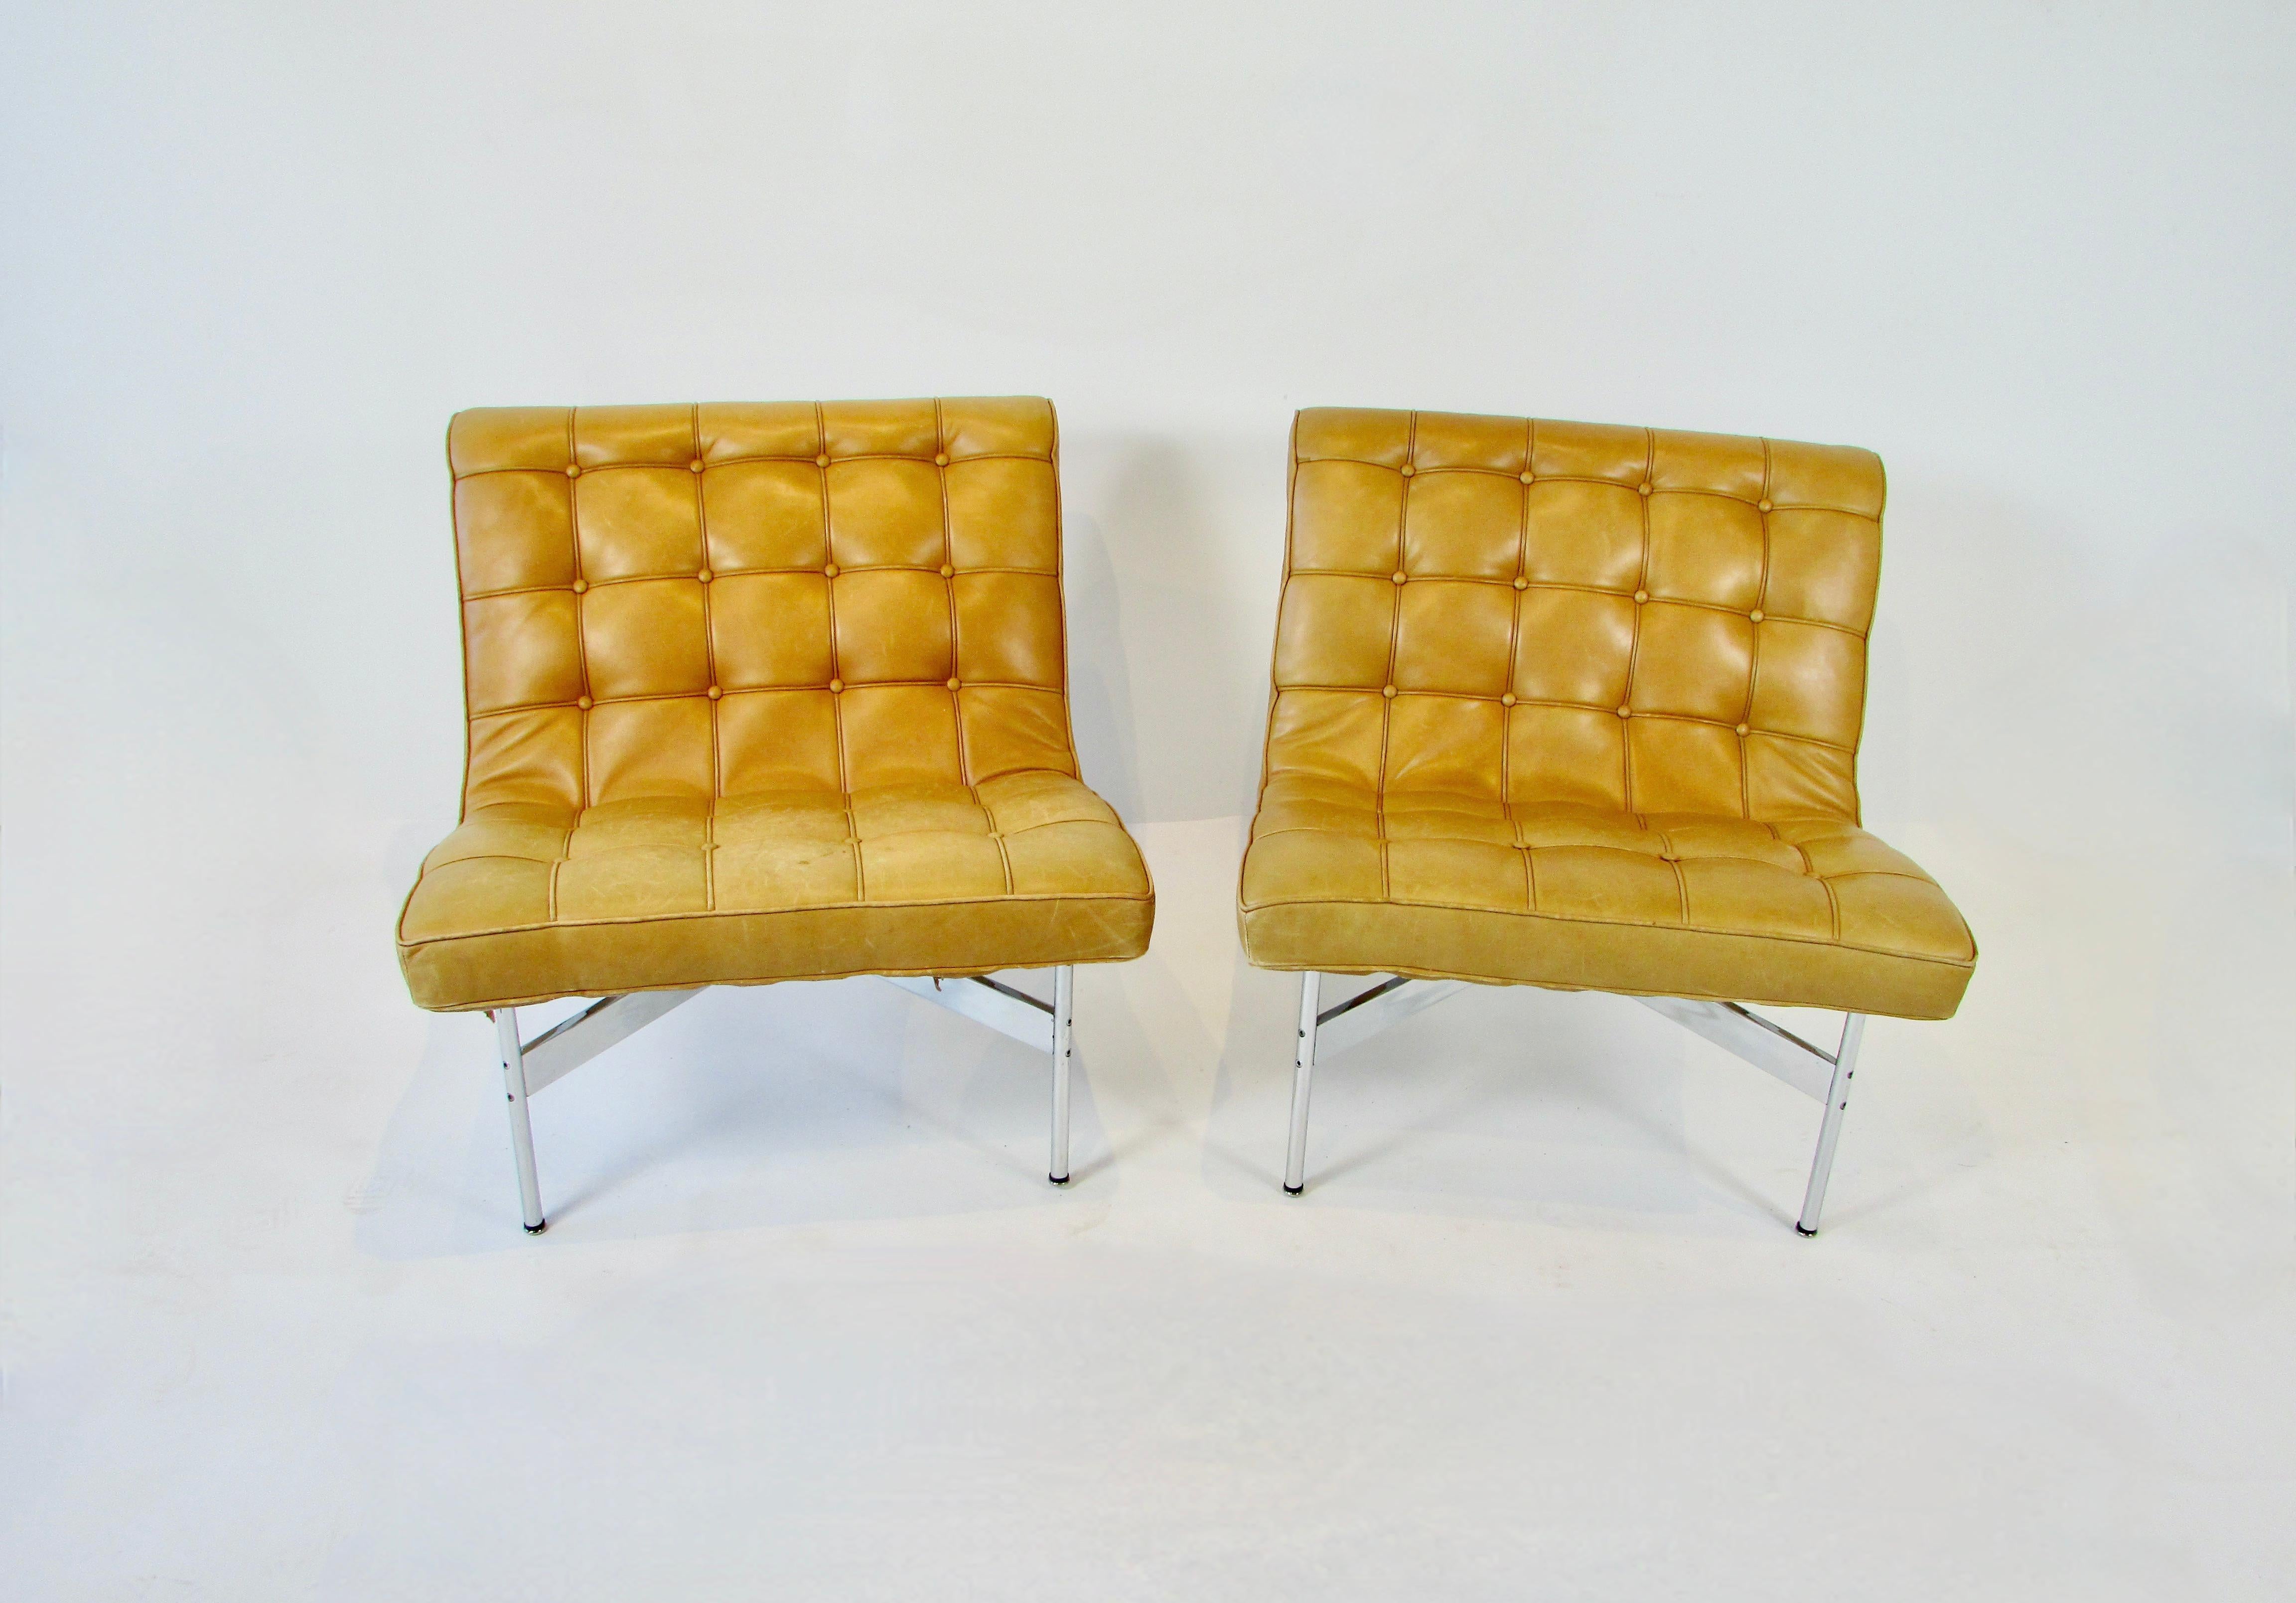 Classic pair of original lounge chairs designed by William Katavolos, Ross Littell and Douglas Kelley for Laverne International from the Architectural Group One line of 1952.  Architectural in design , the steel frame creates an open  floating